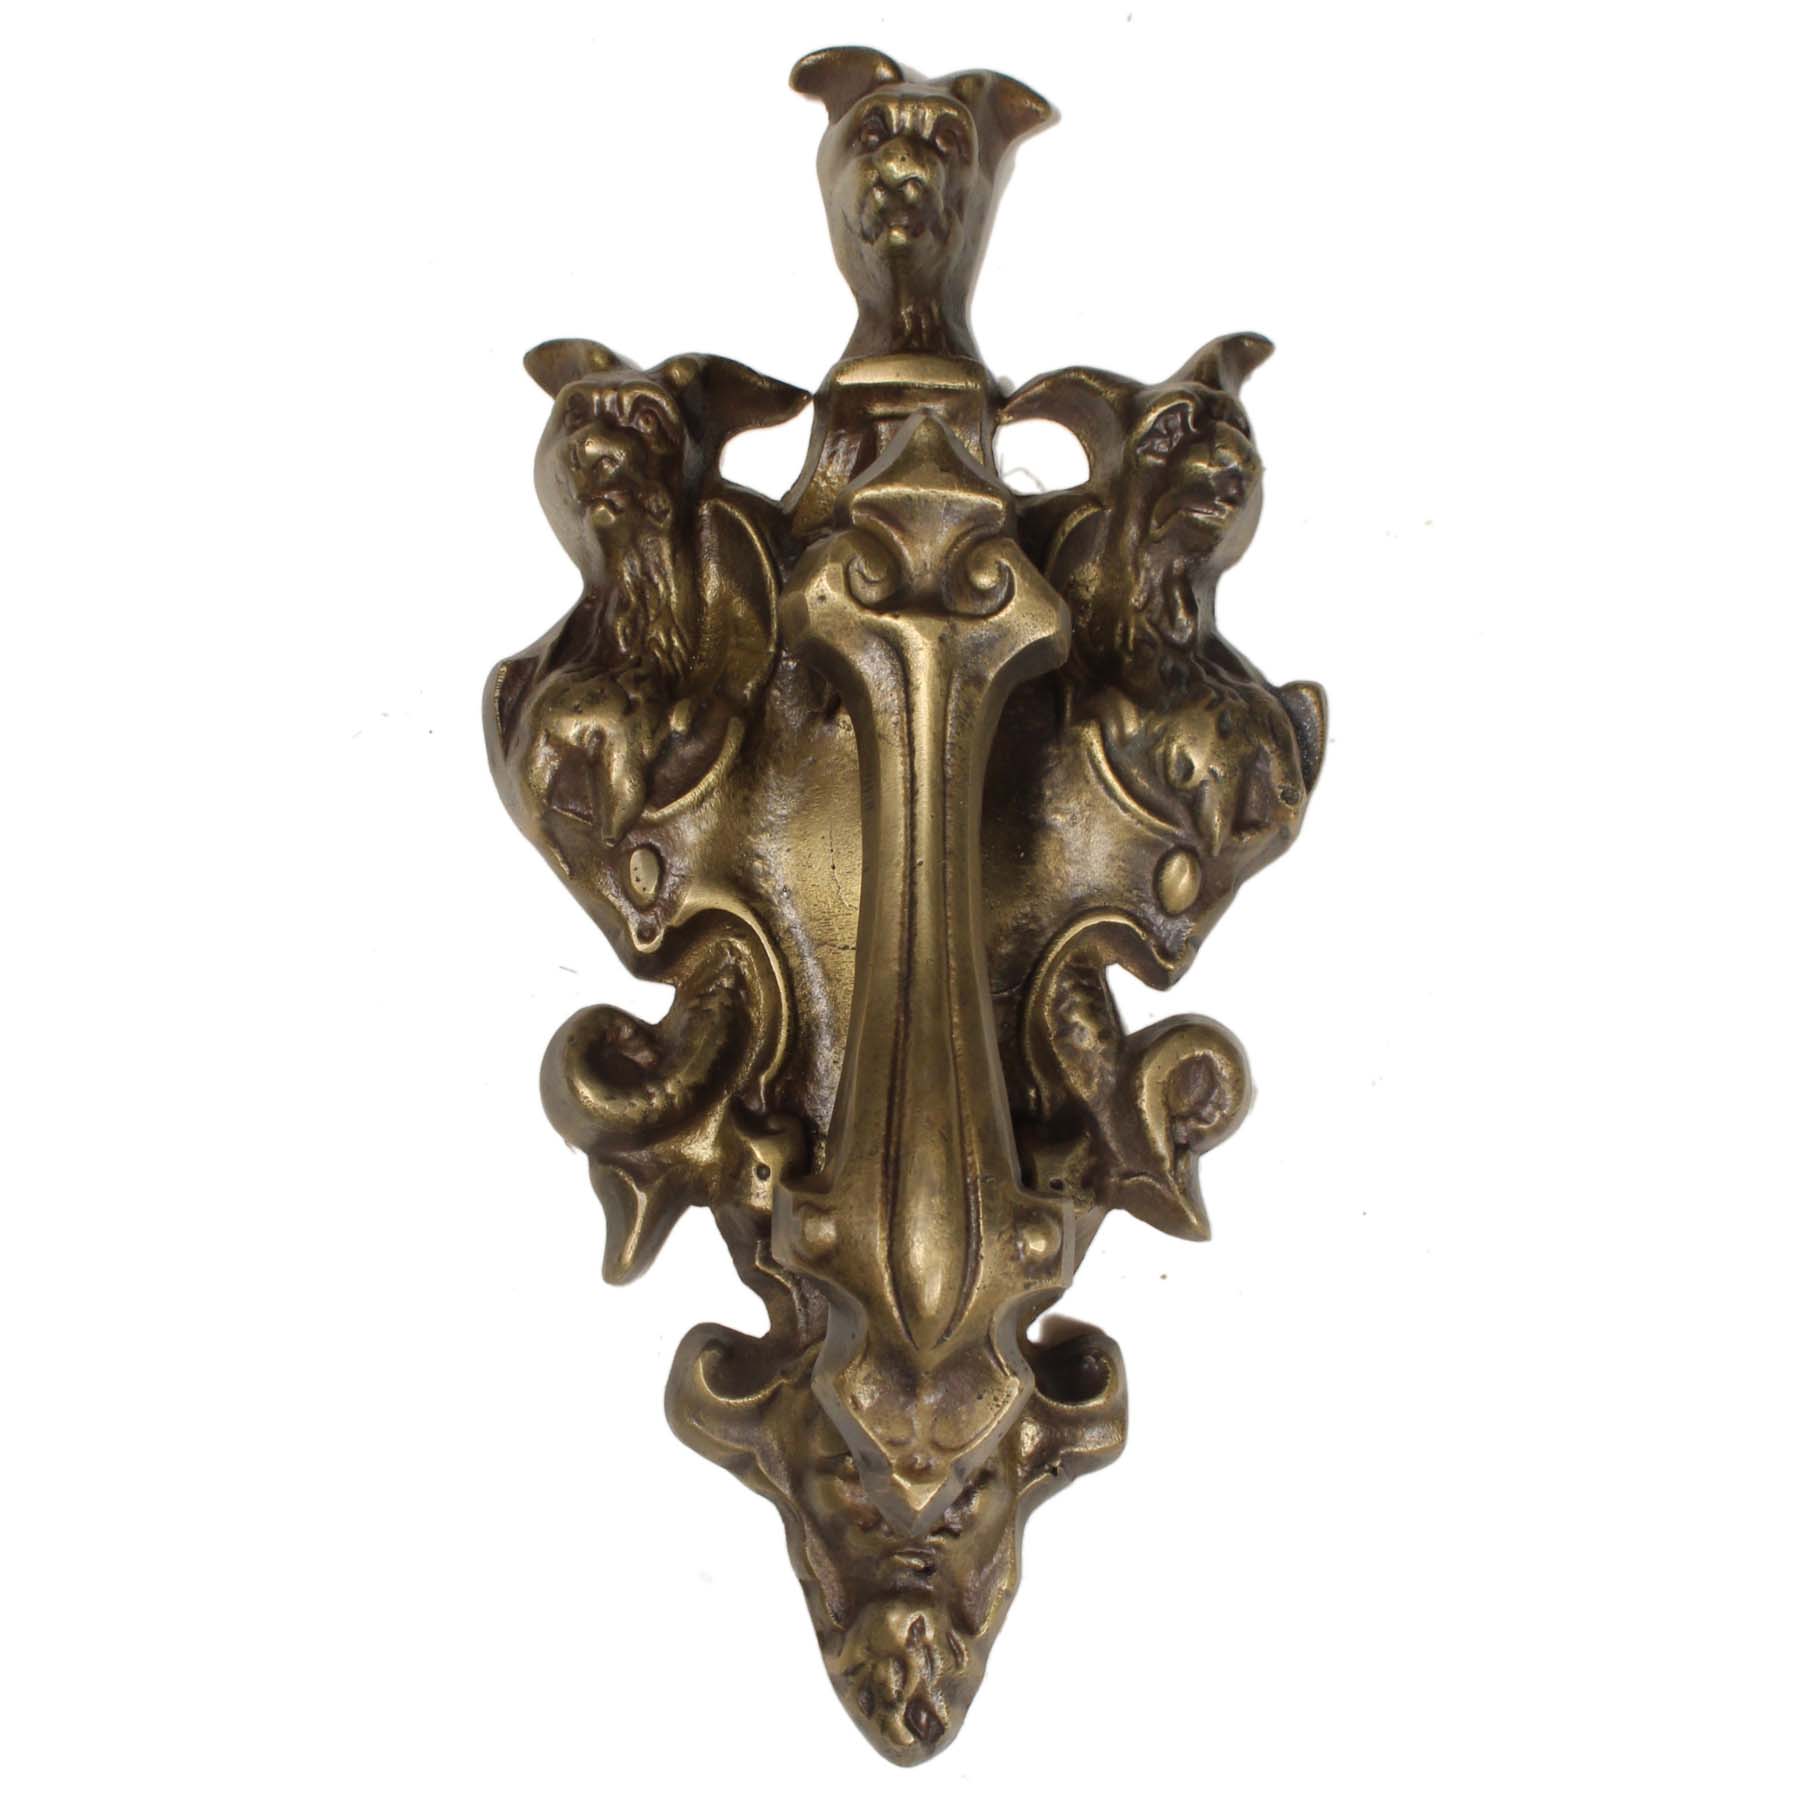 Substantial Vintage Figural Door Knocker with Devil and Gargoyles, Early 1900s-0